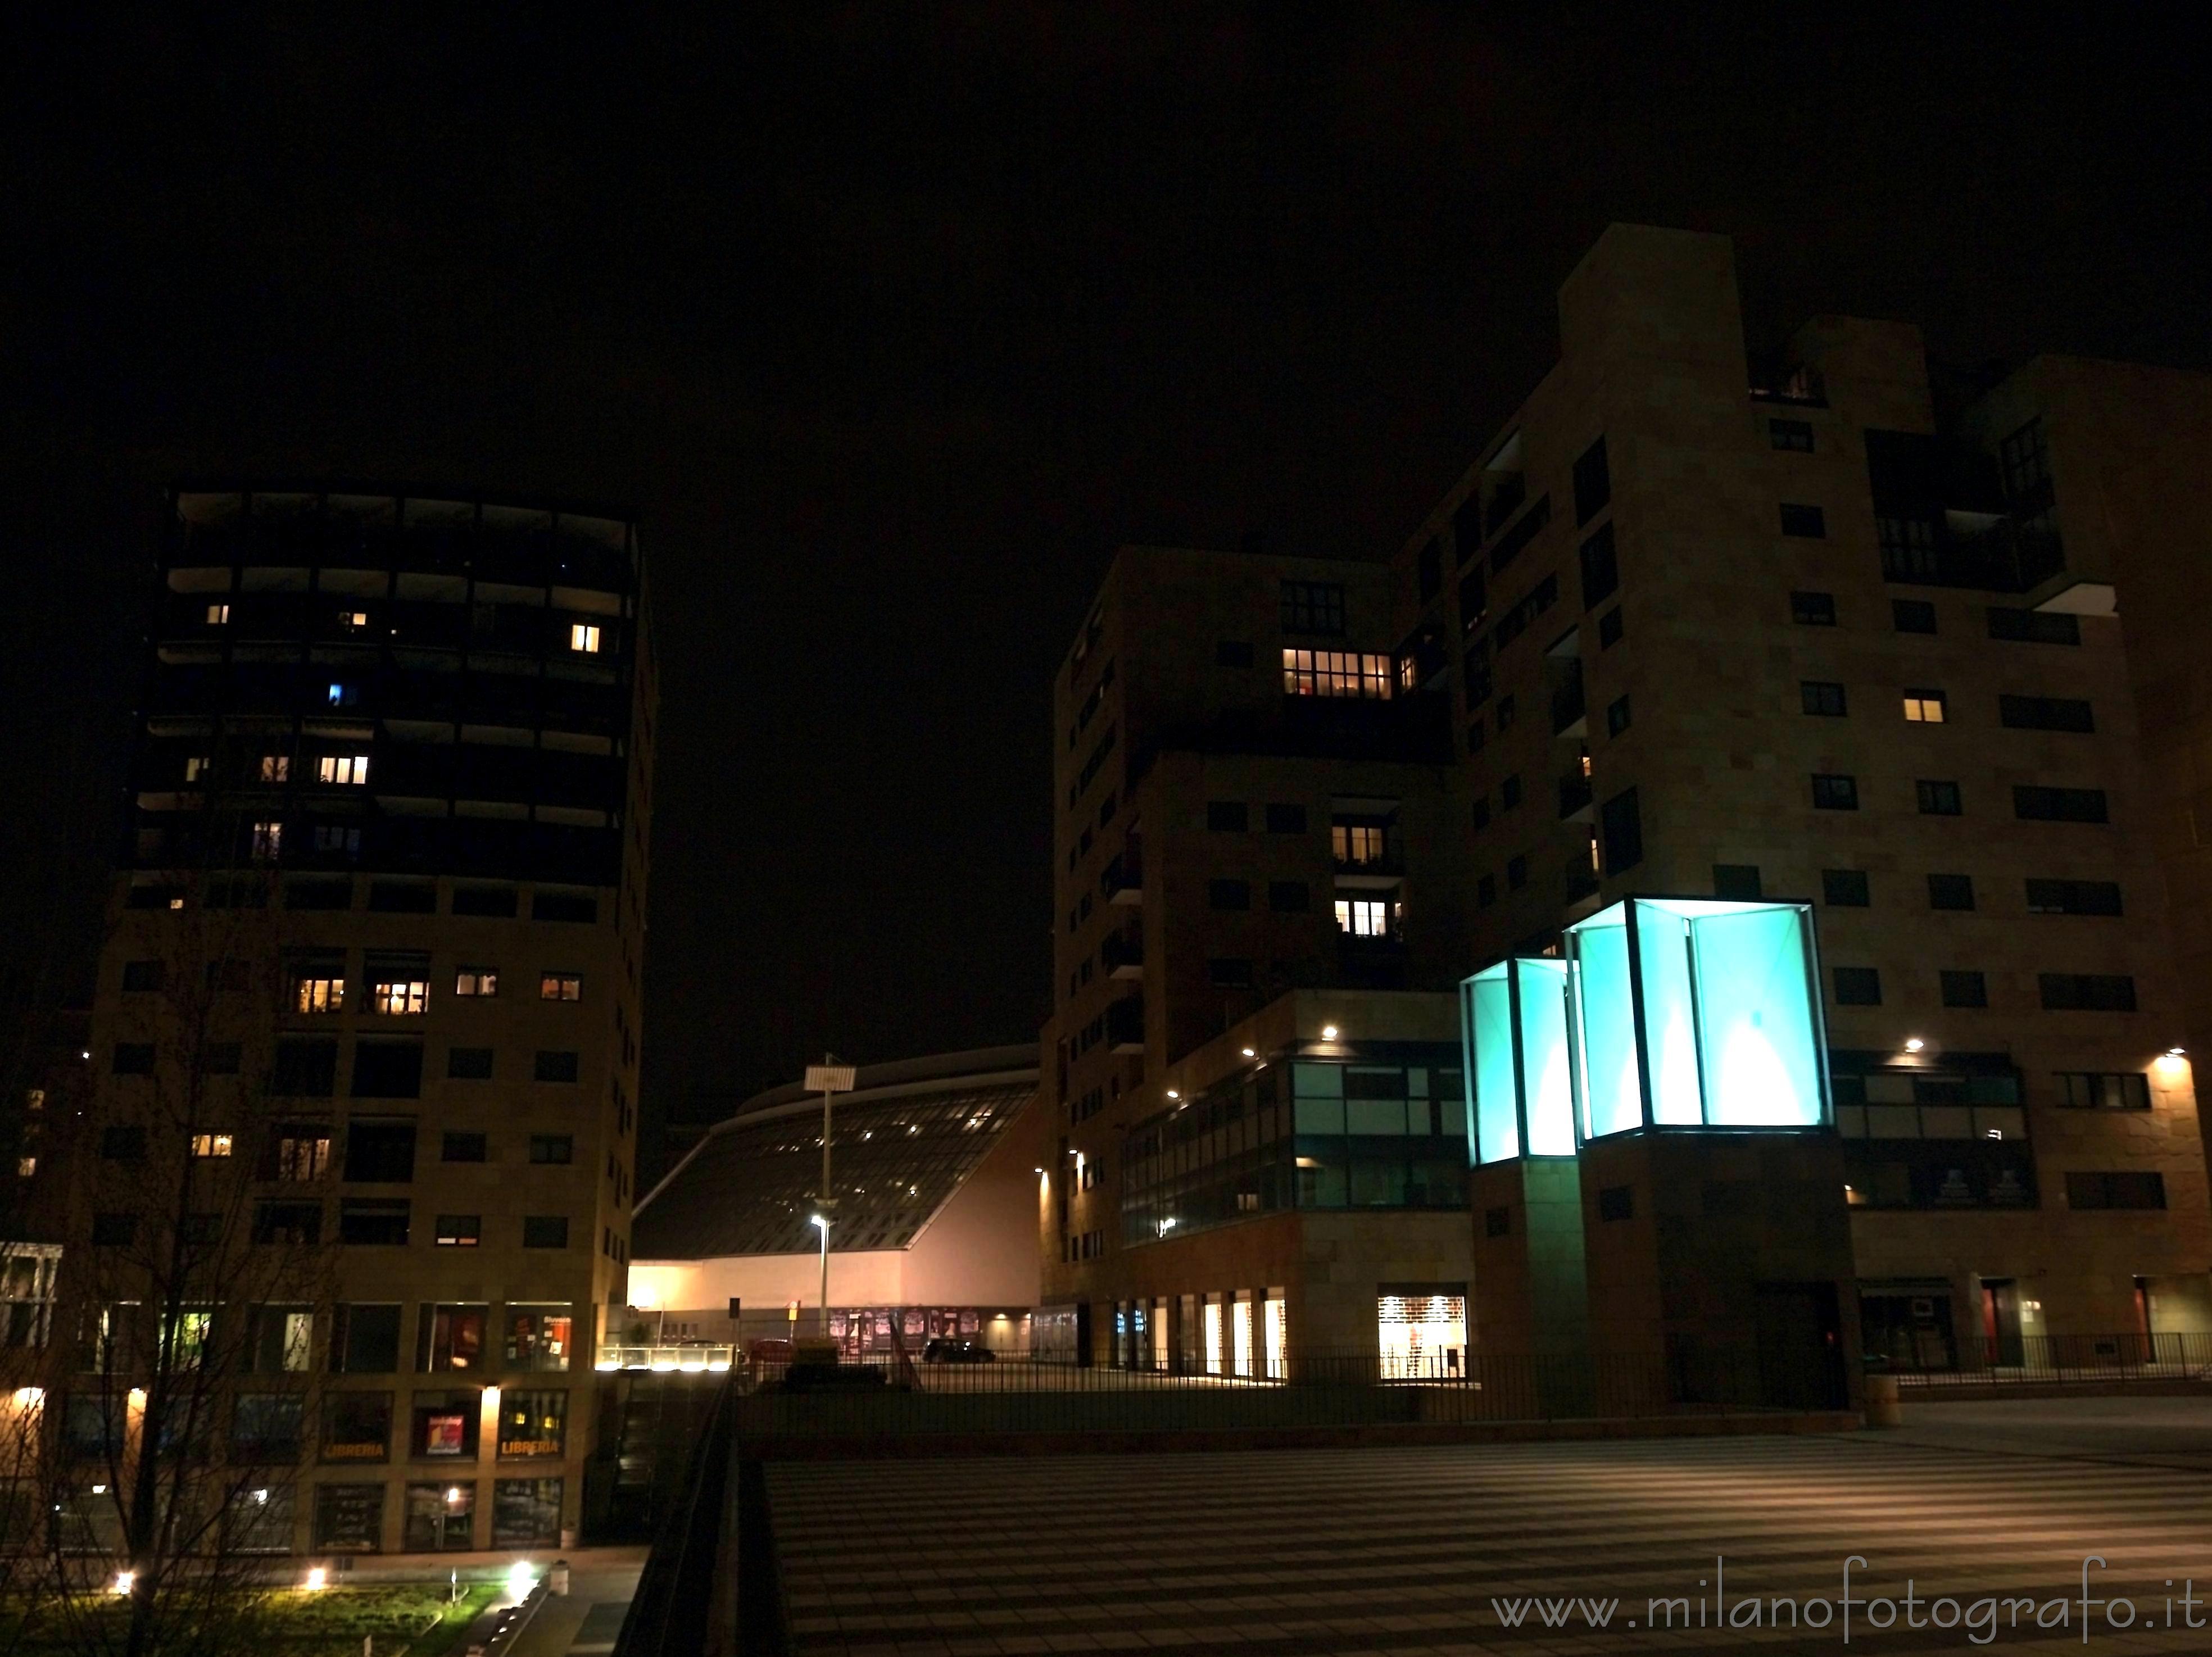 Milan (Italy): Bicocca quarter by night with the Arcimboldi Theatre in the background - Milan (Italy)